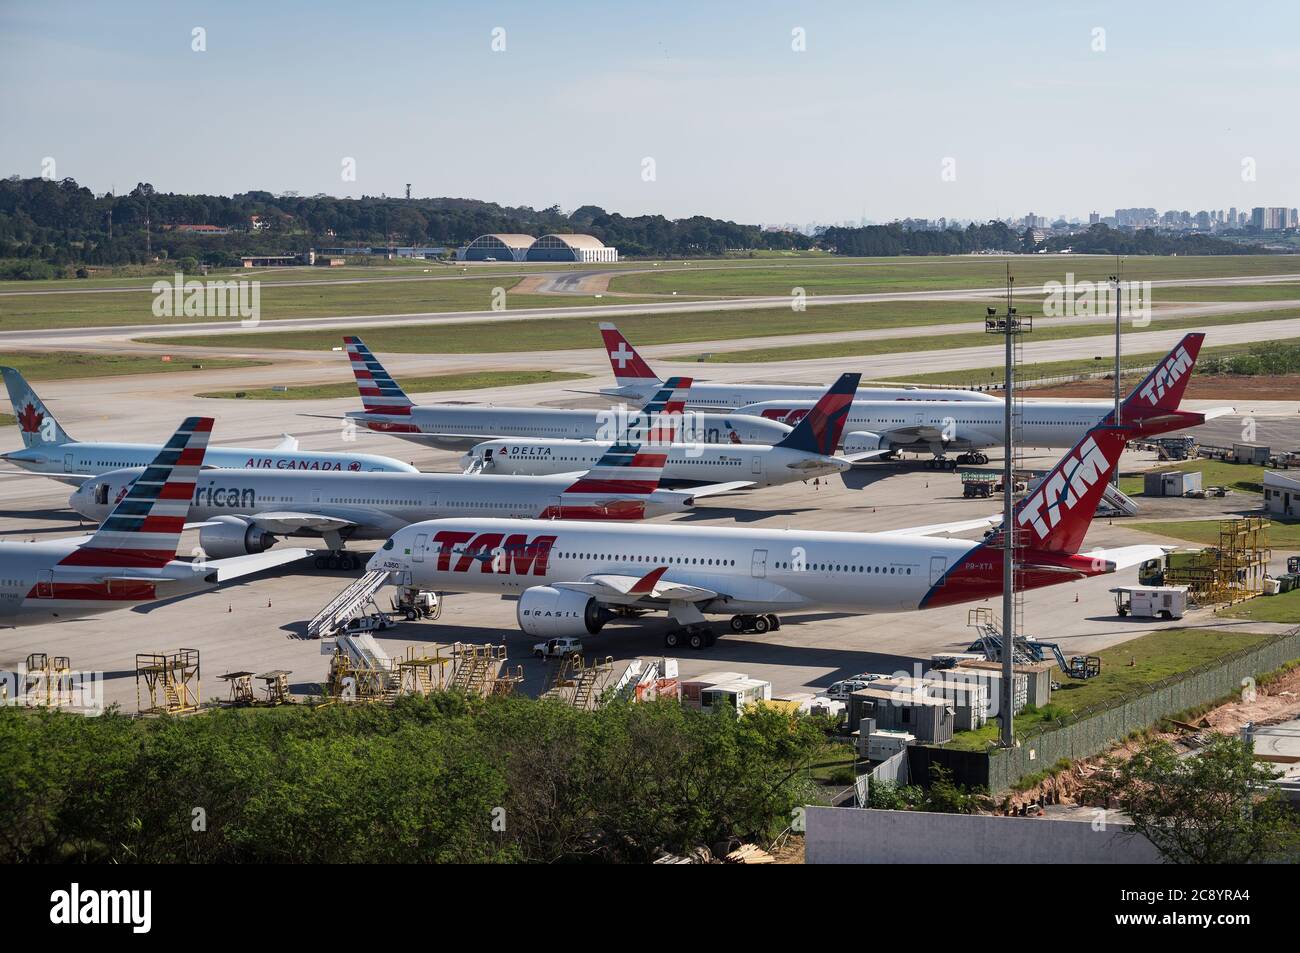 TAM Airlines Airbus A350 XWB (Long range wide-body aircraft - PR-XTA) parked with other airliners at the remote area of Guarulhos Intl. Airport. Stock Photo